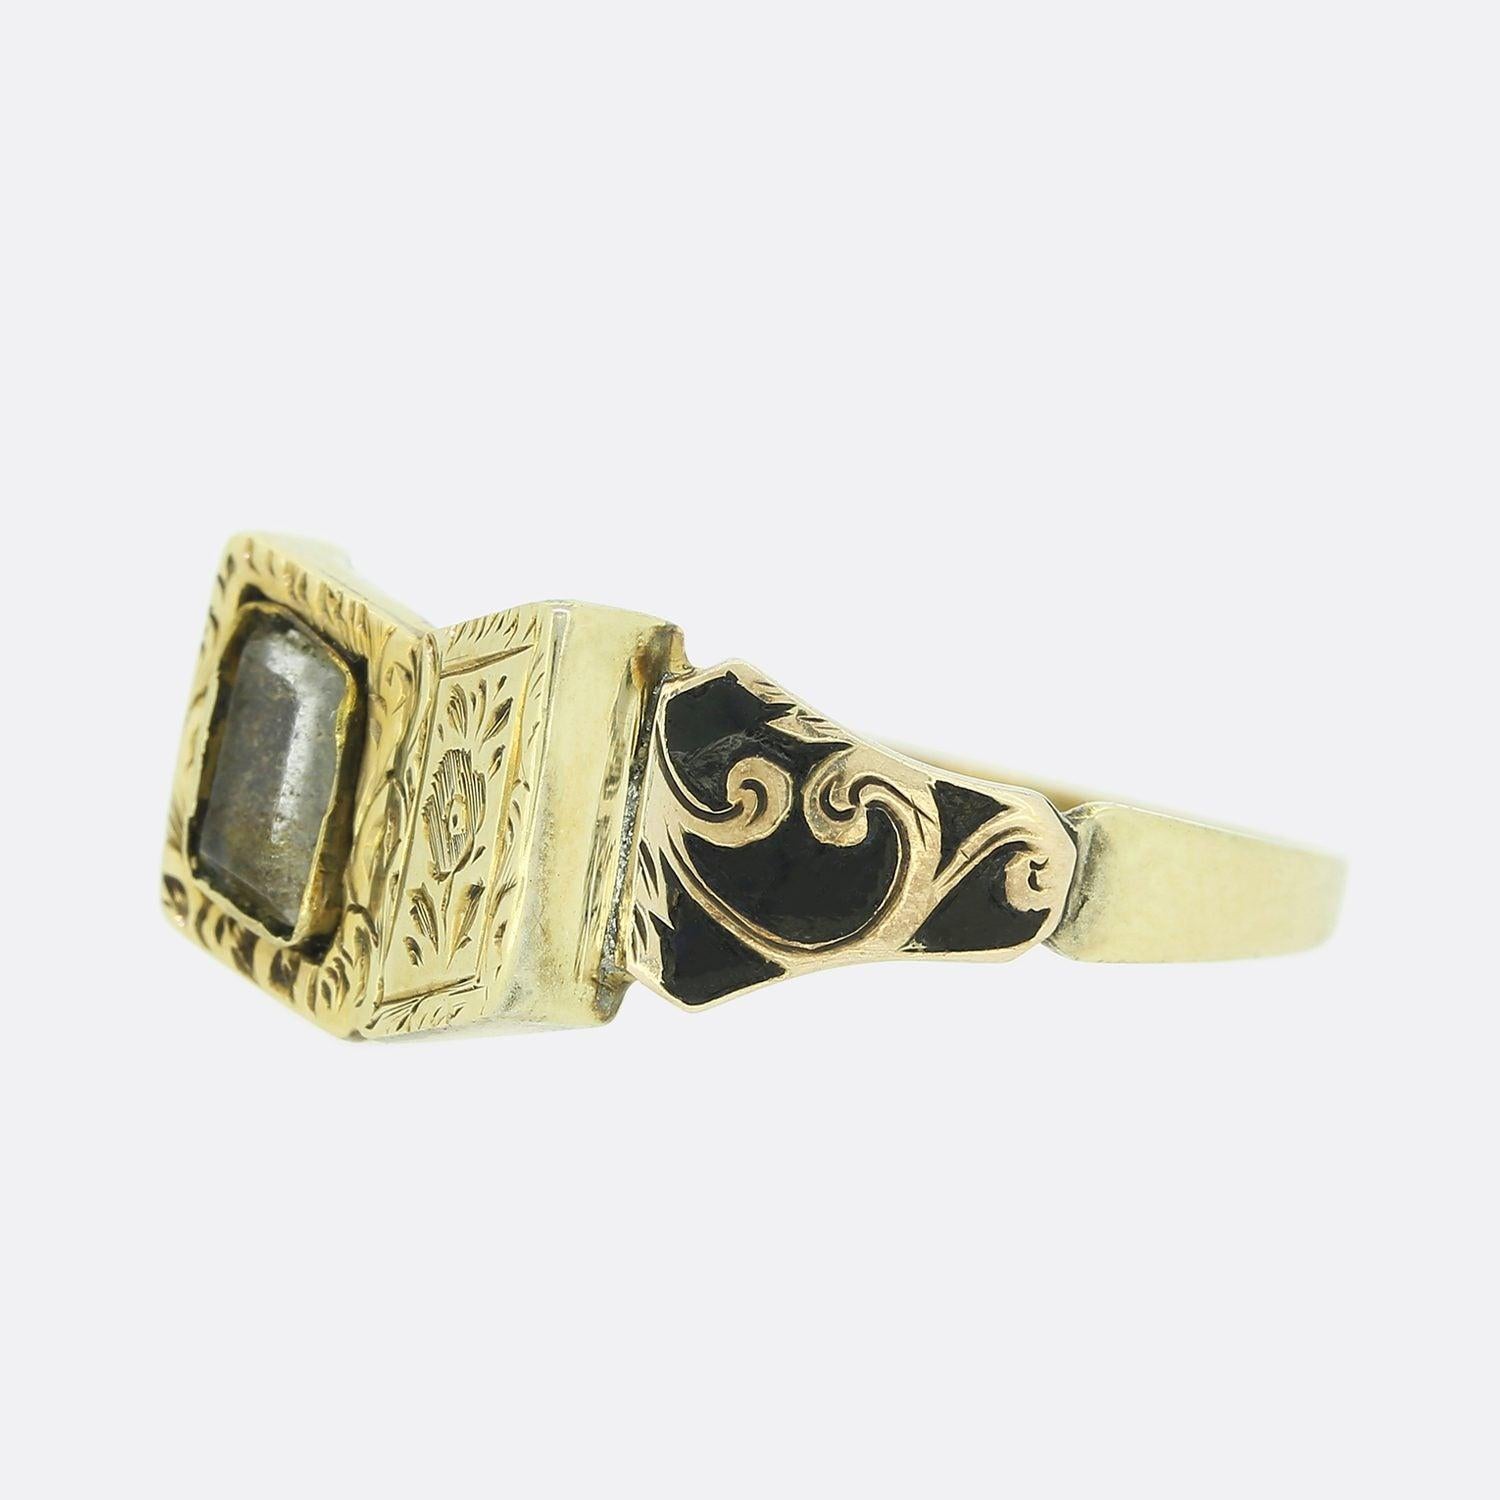 This is a wonderful 15ct yellow gold mourning ring from the Victorian era. The ring has been set with a central rectangular window in a book motif that features a small locket of hair with beautiful engraved detailing. The shoulders of the ring are